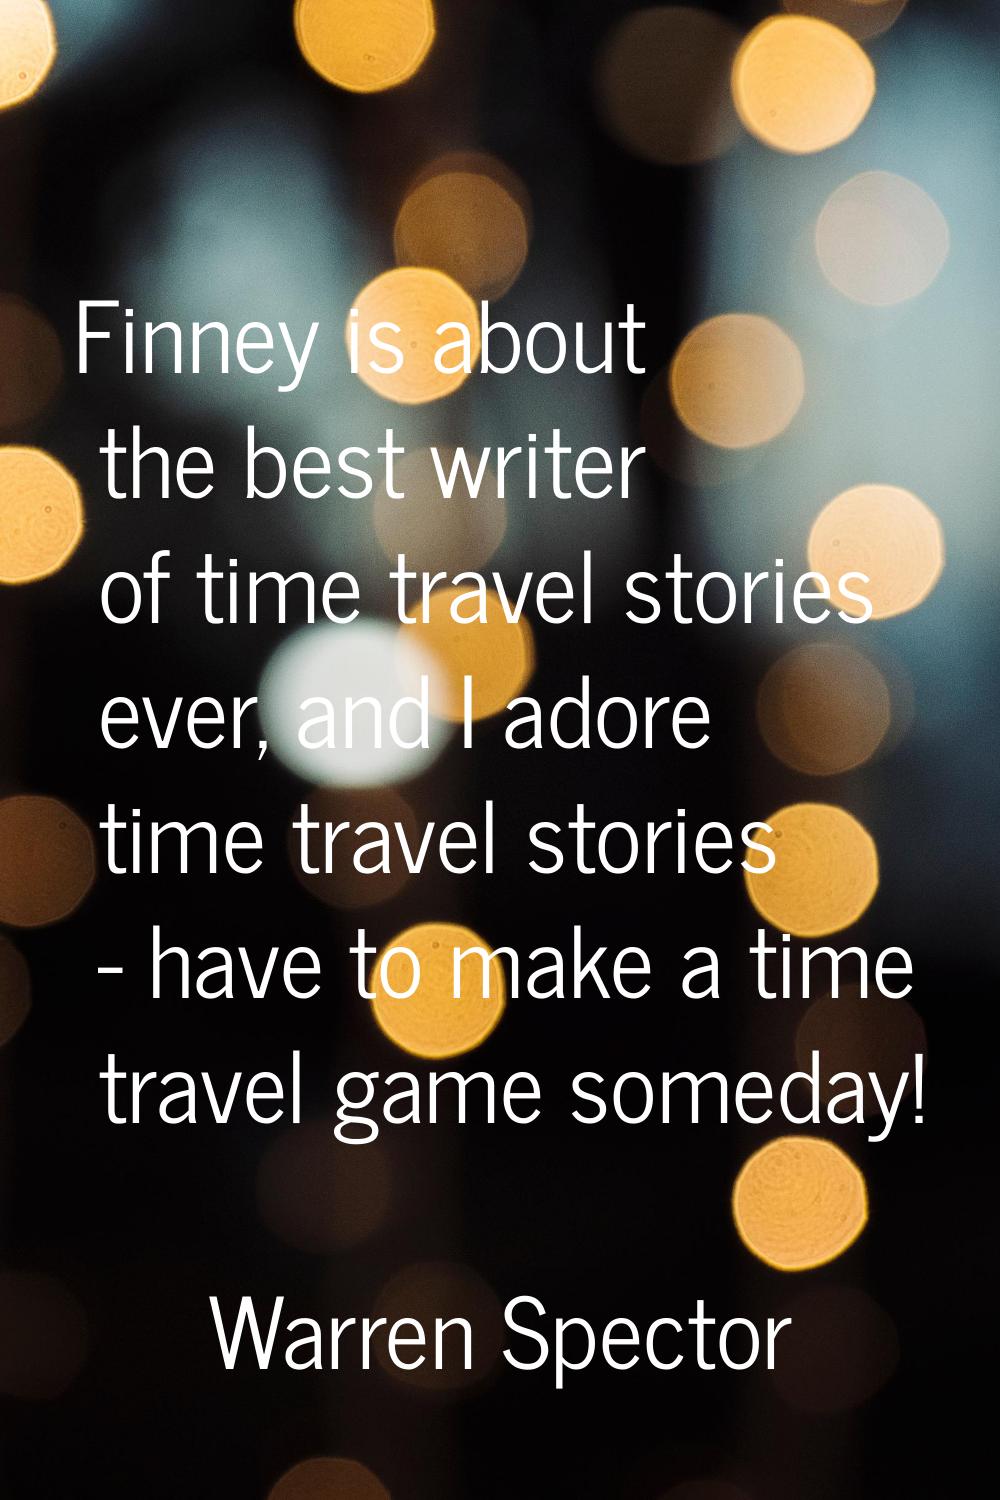 Finney is about the best writer of time travel stories ever, and I adore time travel stories - have